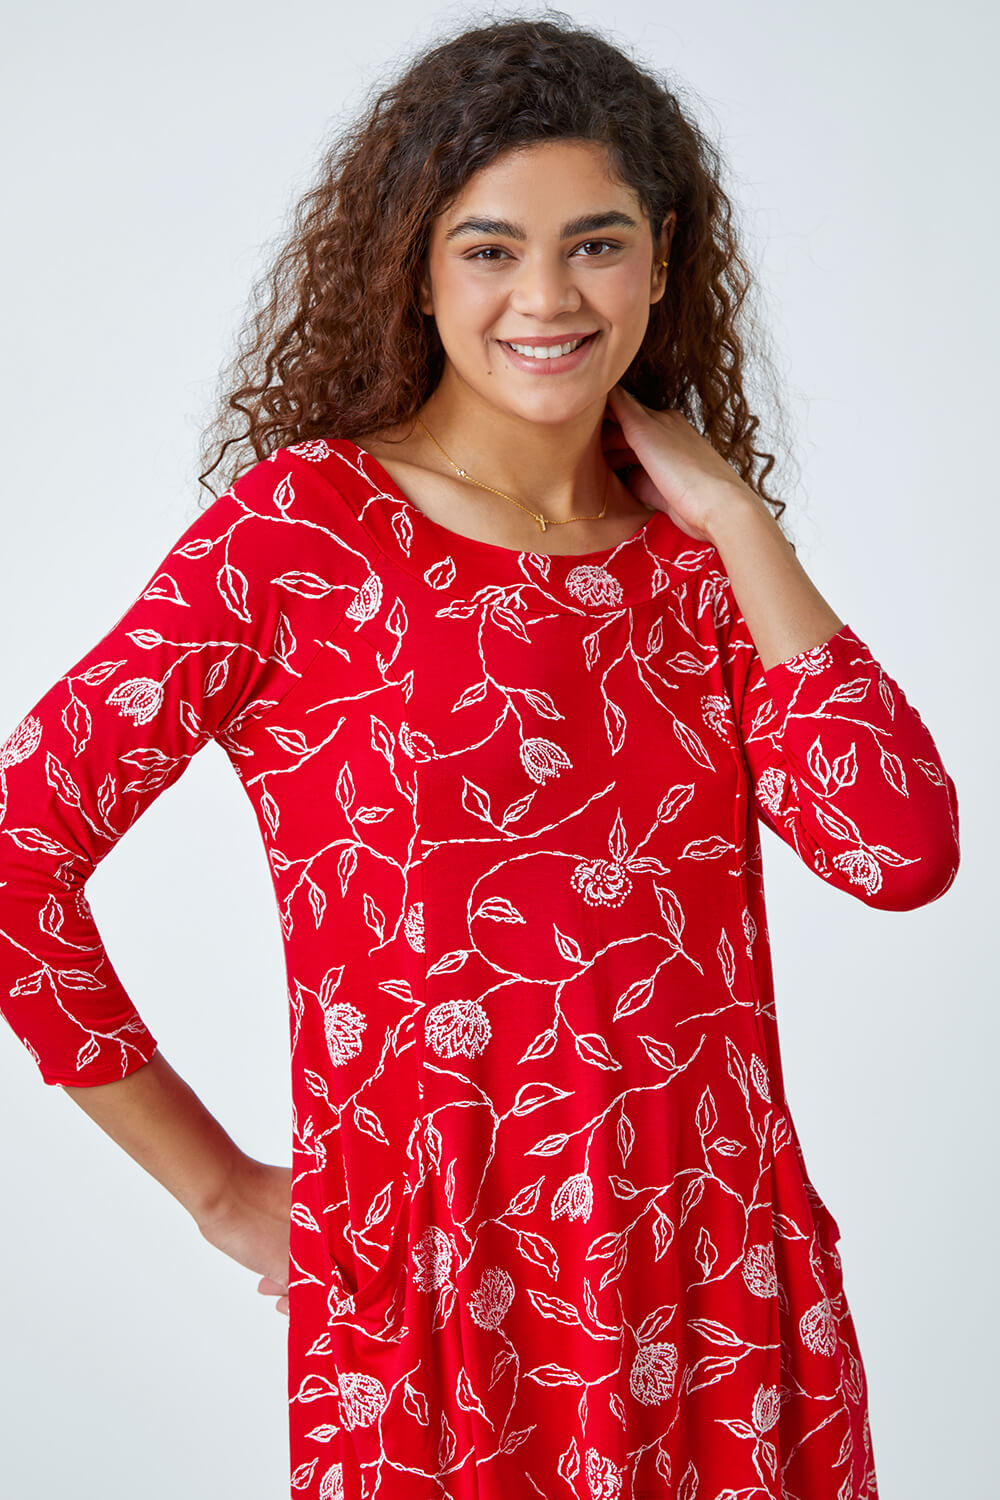 Red Floral Print Swing Stretch Top, Image 4 of 5